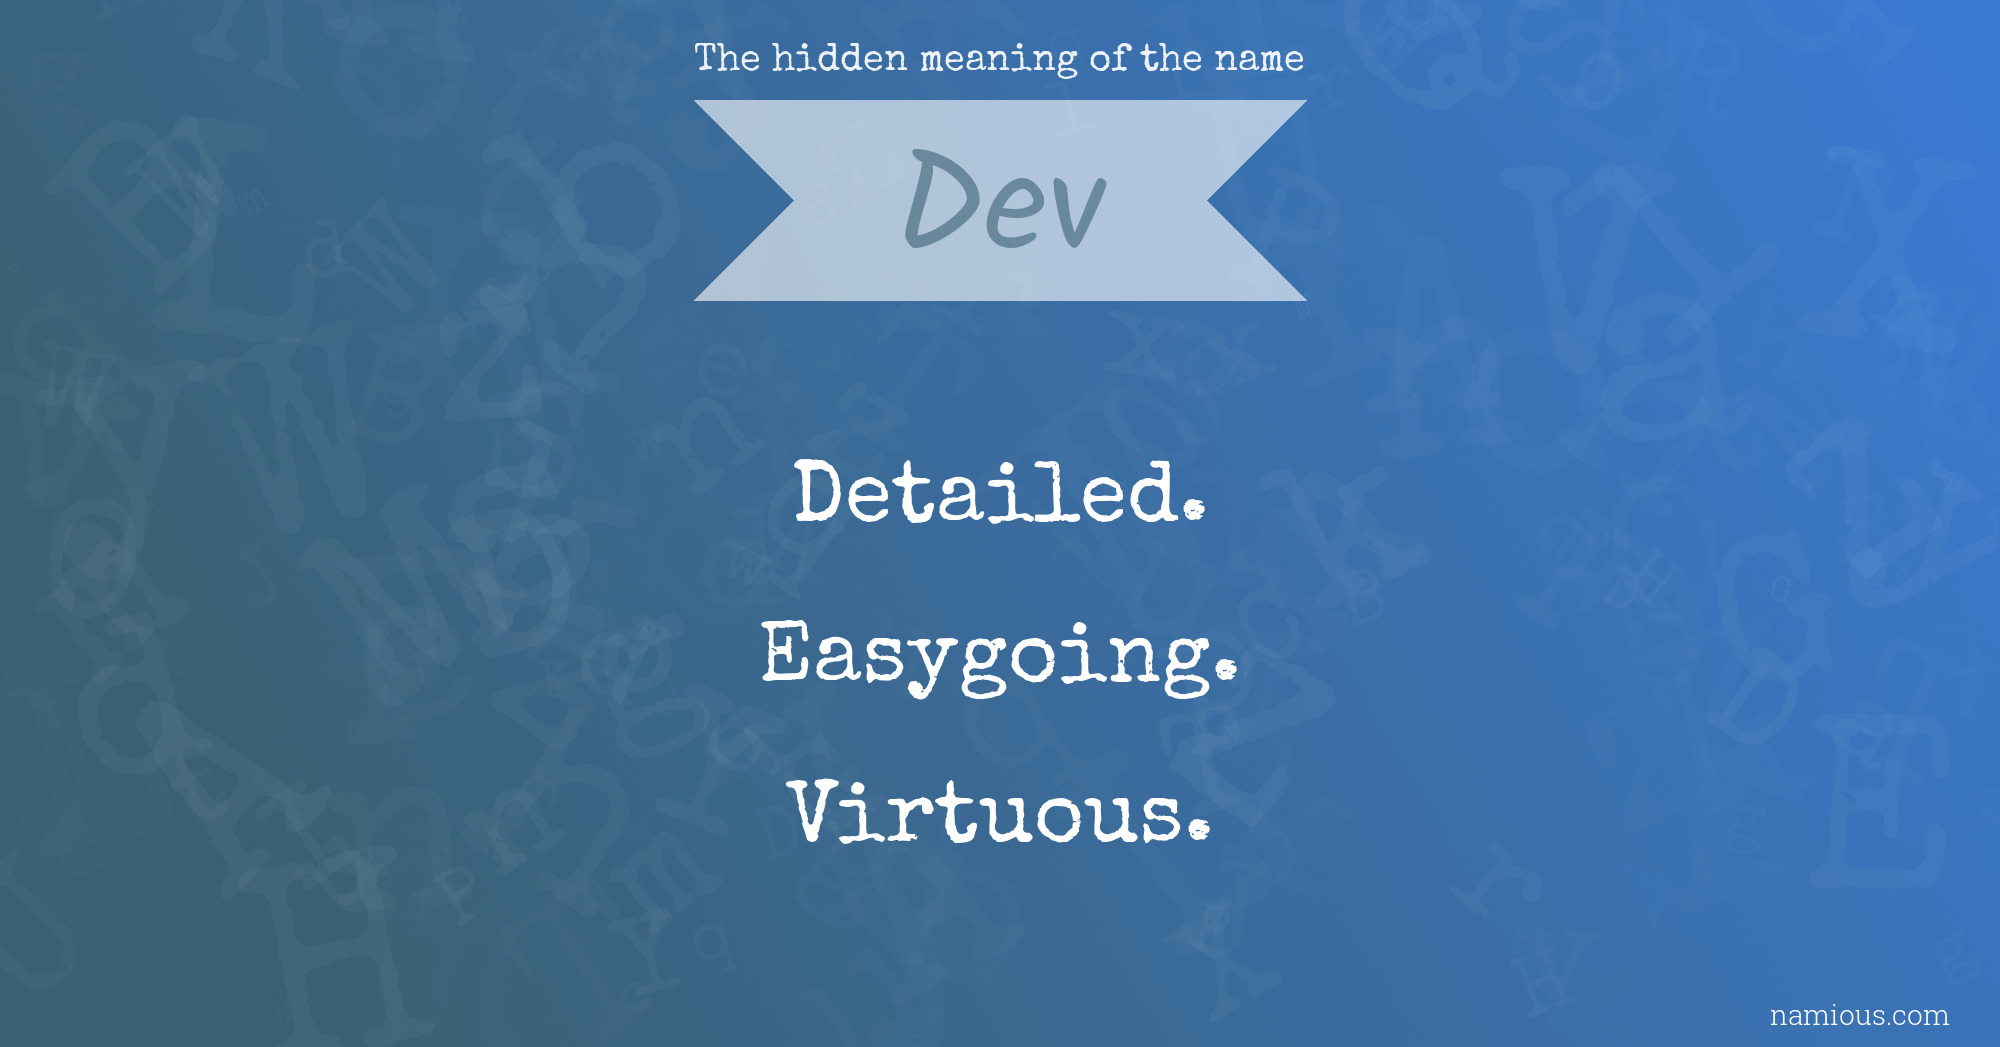 The hidden meaning of the name Dev